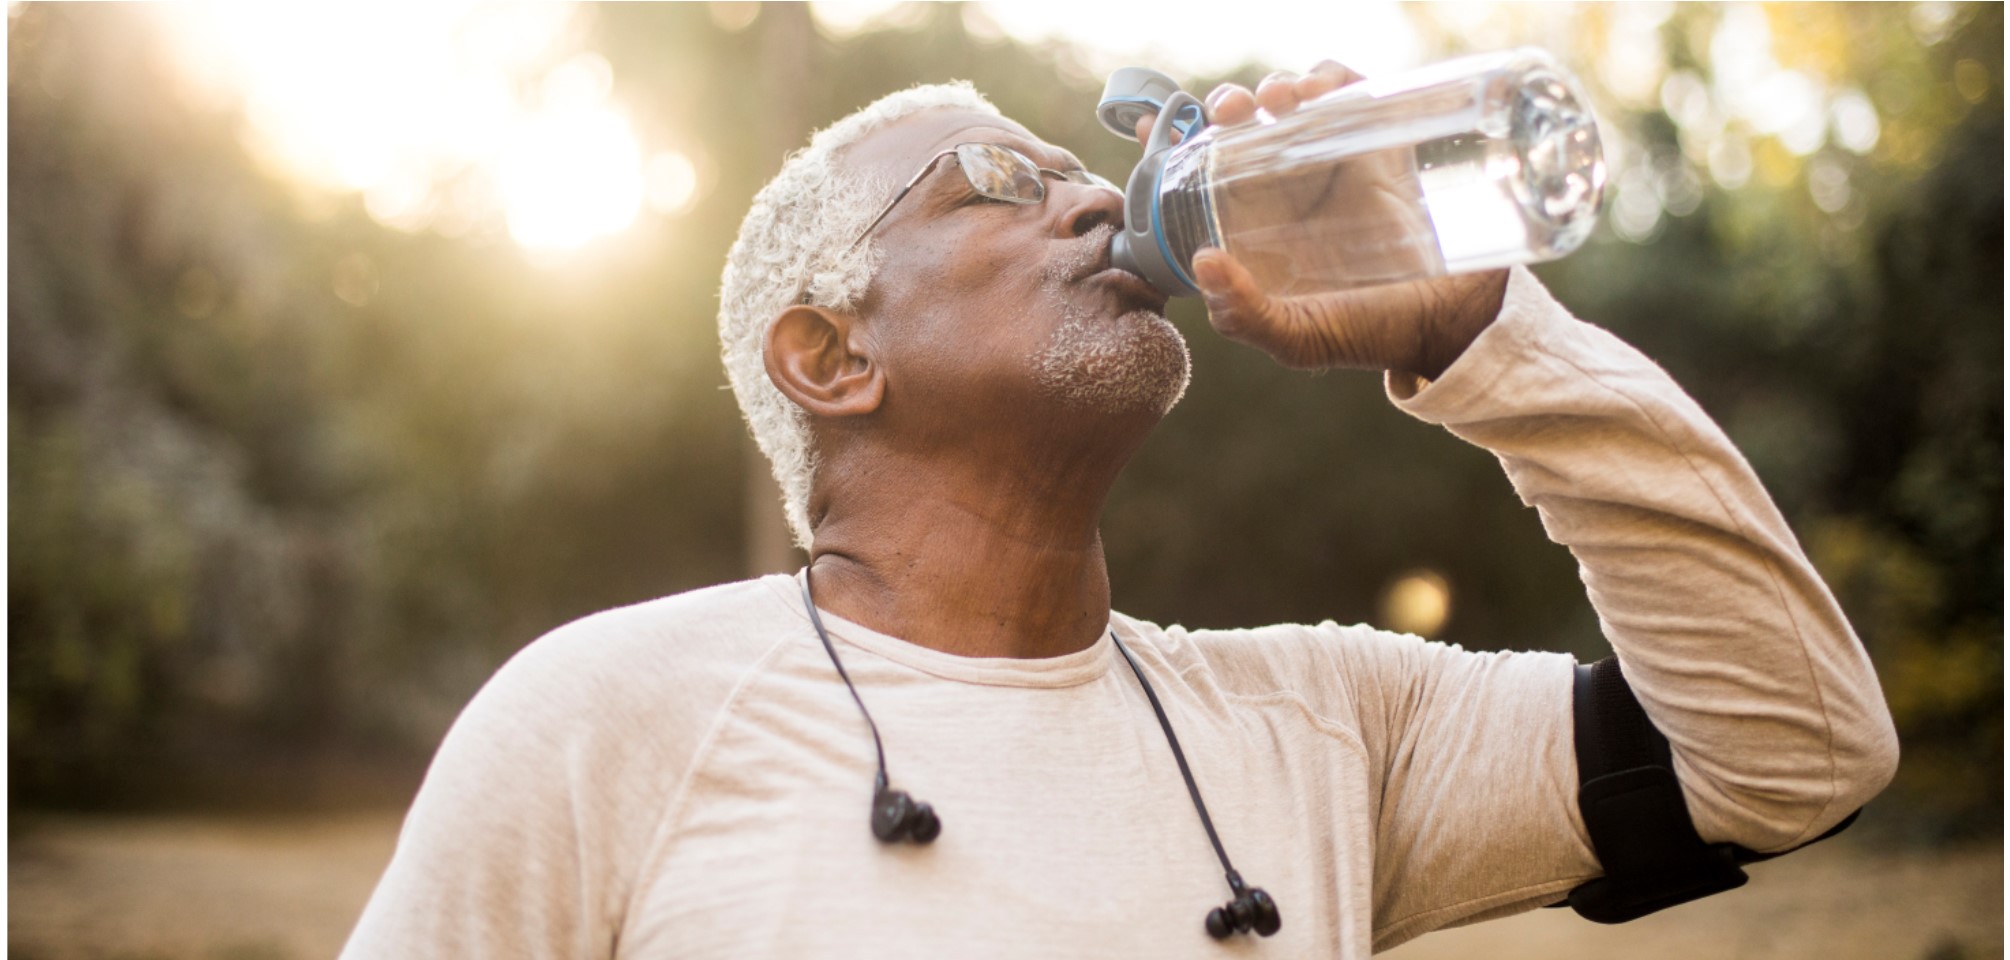 older adult staying hydrated